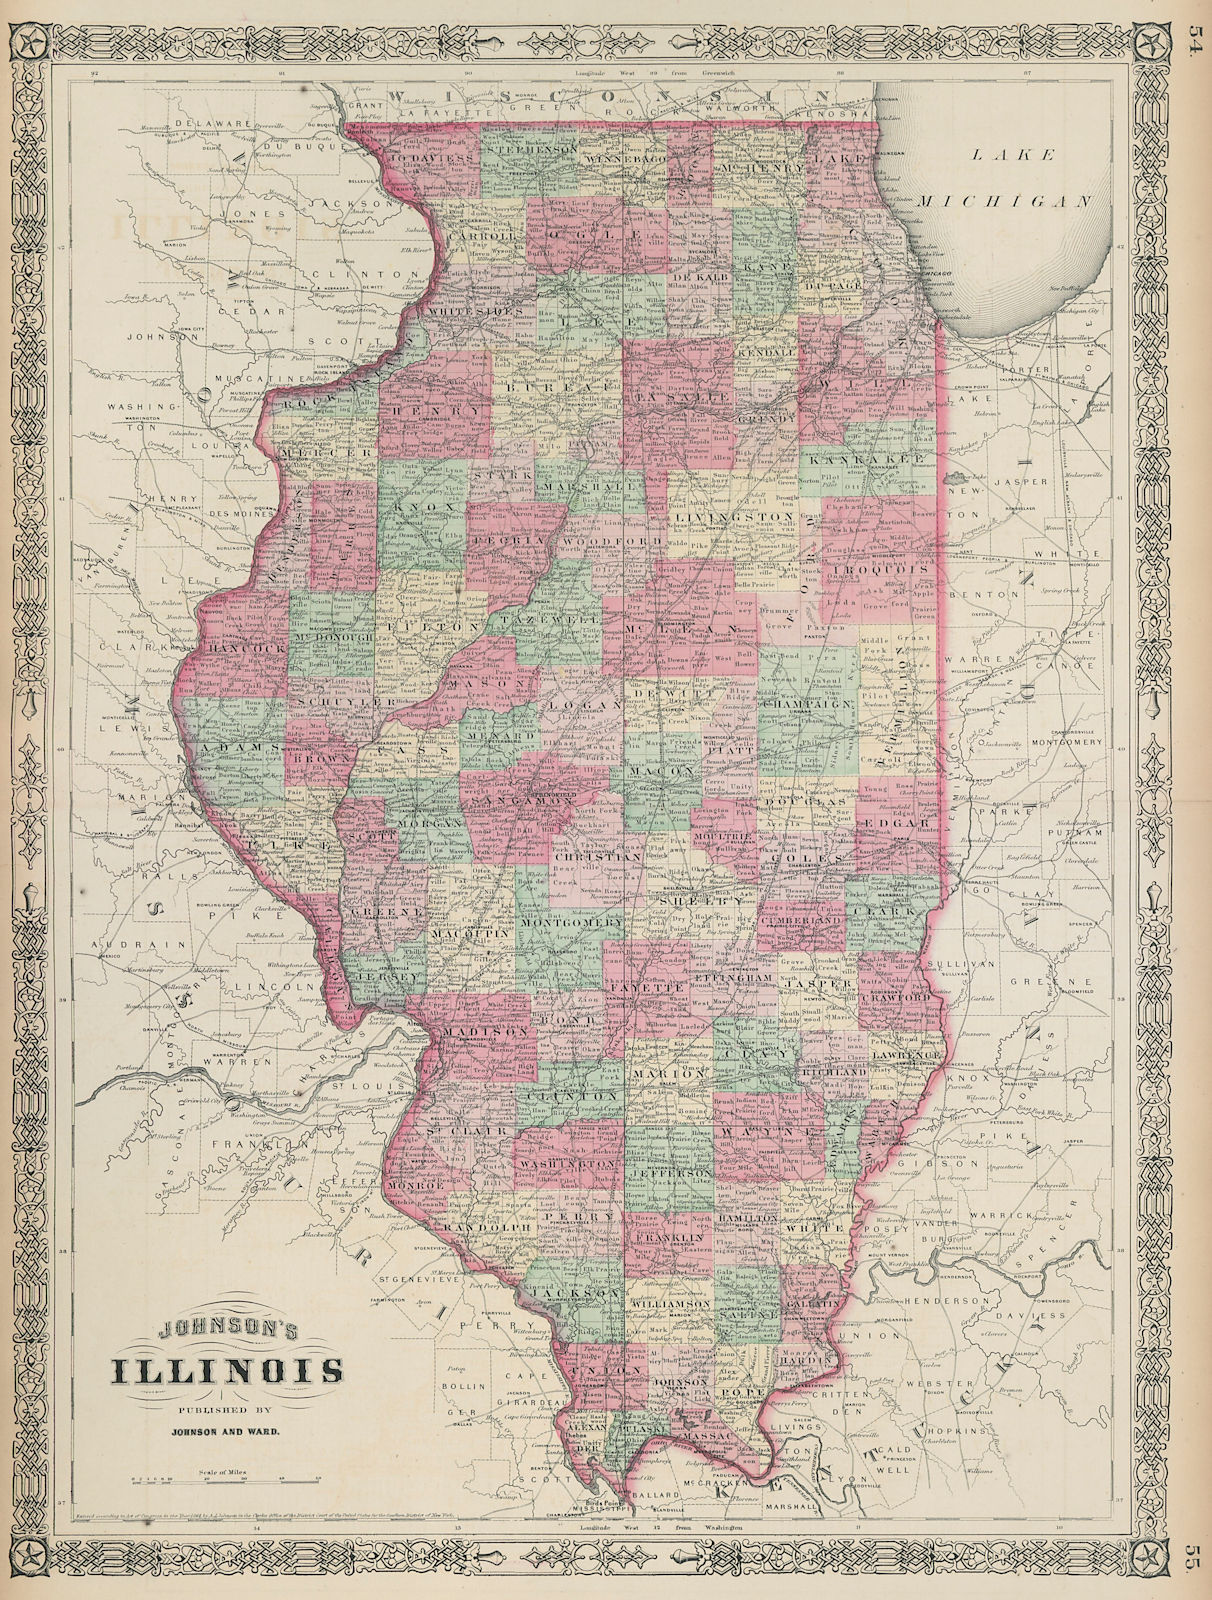 Associate Product Johnson's Illinois. US state map showing counties 1865 old antique chart